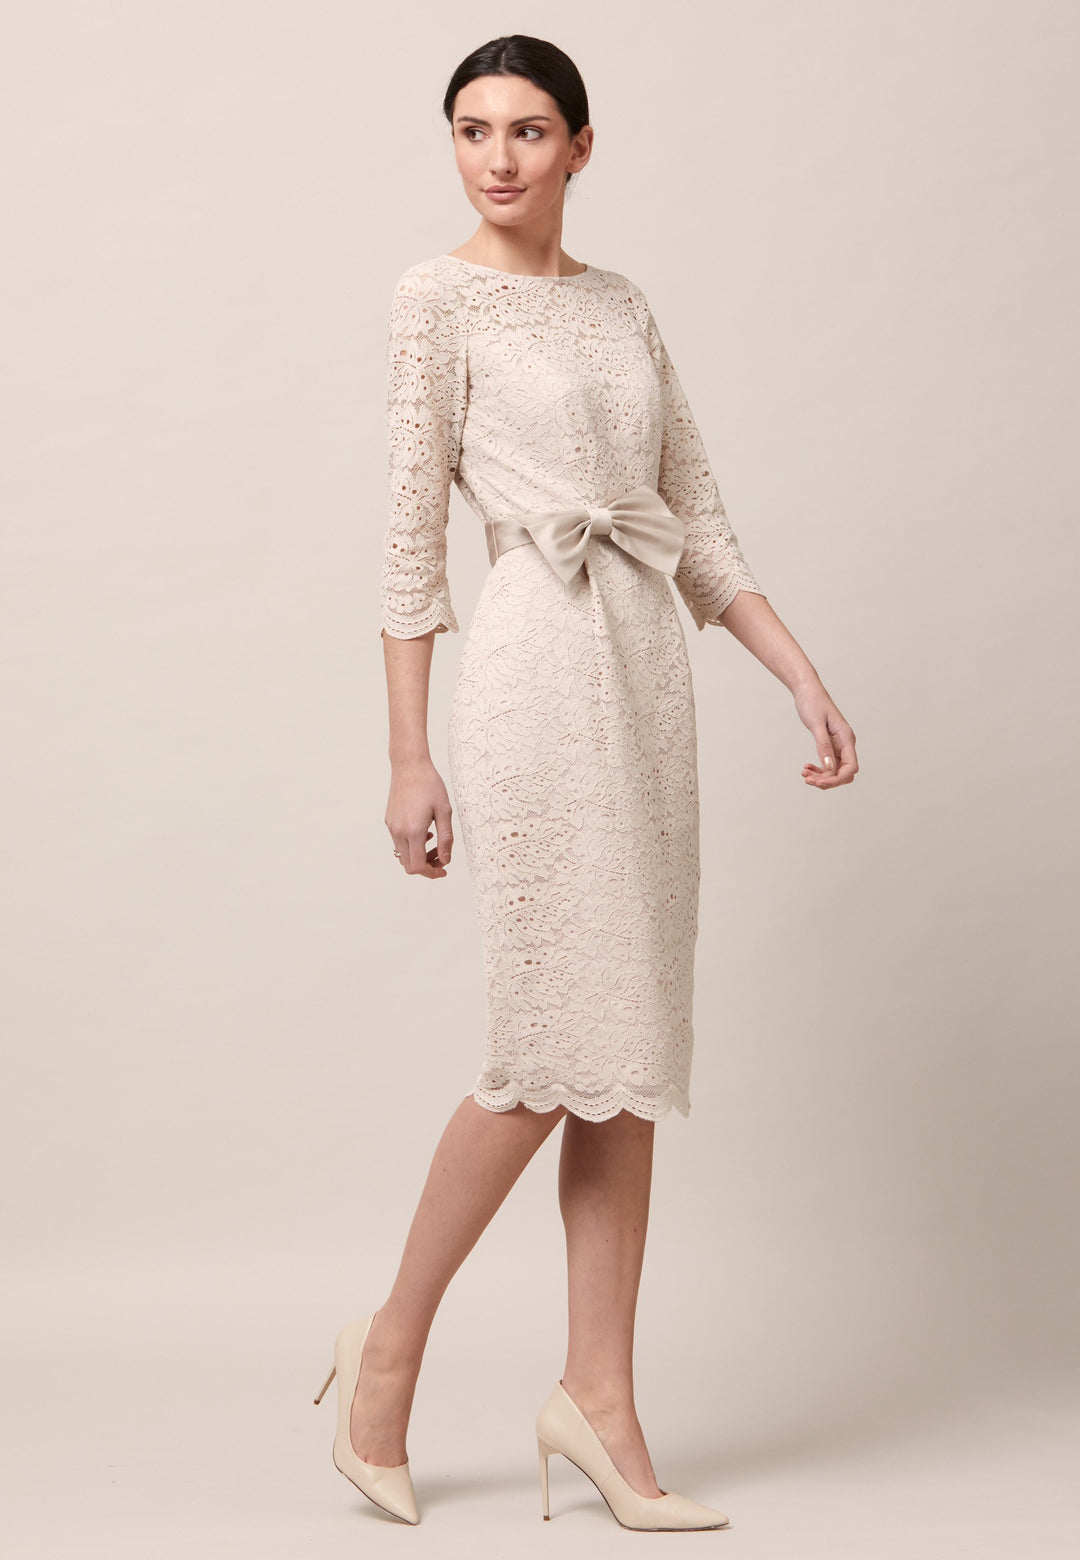 Turn Heads at your upcoming occasions in the Michelle dress. Crafted in an elegant lace dress in a warm oyster tone. This style fits close to the profile with a flattering finish. Engineered with pleats at the waistline to allow the fabric to fall softly over the hips. The satin bow-belt is detachable for added versatility. Features a scalloped hem and sleeves. Attending a summer wedding? Mother of the bride? Heading to the races? This is the dress for you. 